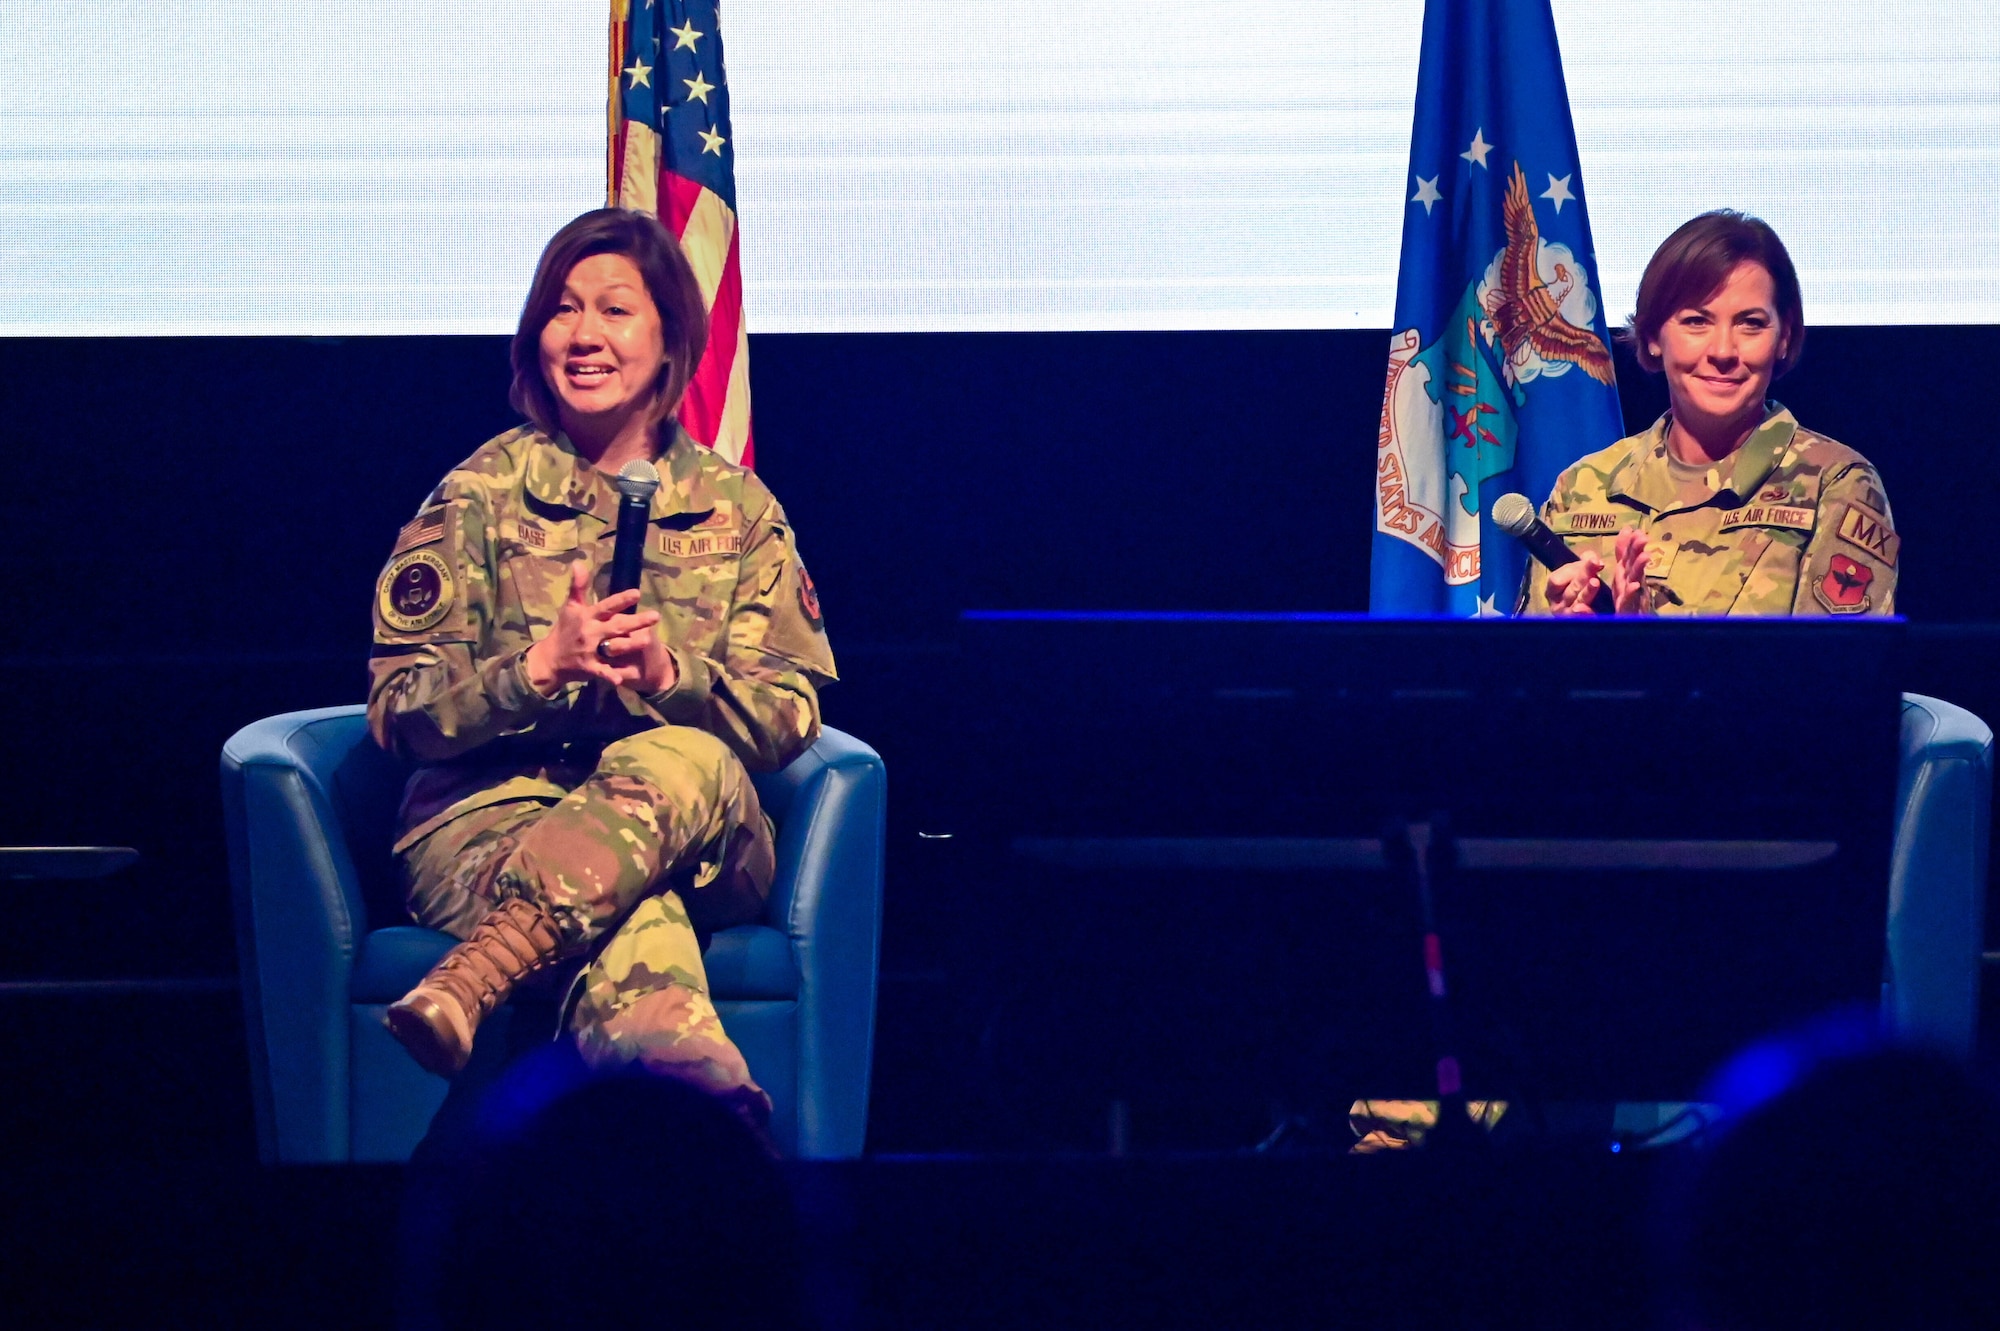 Chief Master Sergeant of the Air Force JoAnne S. Bass and Senior Master Sgt. Danielle Downs, 58th Maintenance Squadron senior enlisted leader, converse with the audience during a panel at the Torch Athena Rally in San Antonio, Texas Sept. 19, 2023. Bass expressed inspiring others requires focusing on personal development and taking care of those around us. (U.S. Air Force photo by Airman 1st Class Heidi Bucins)